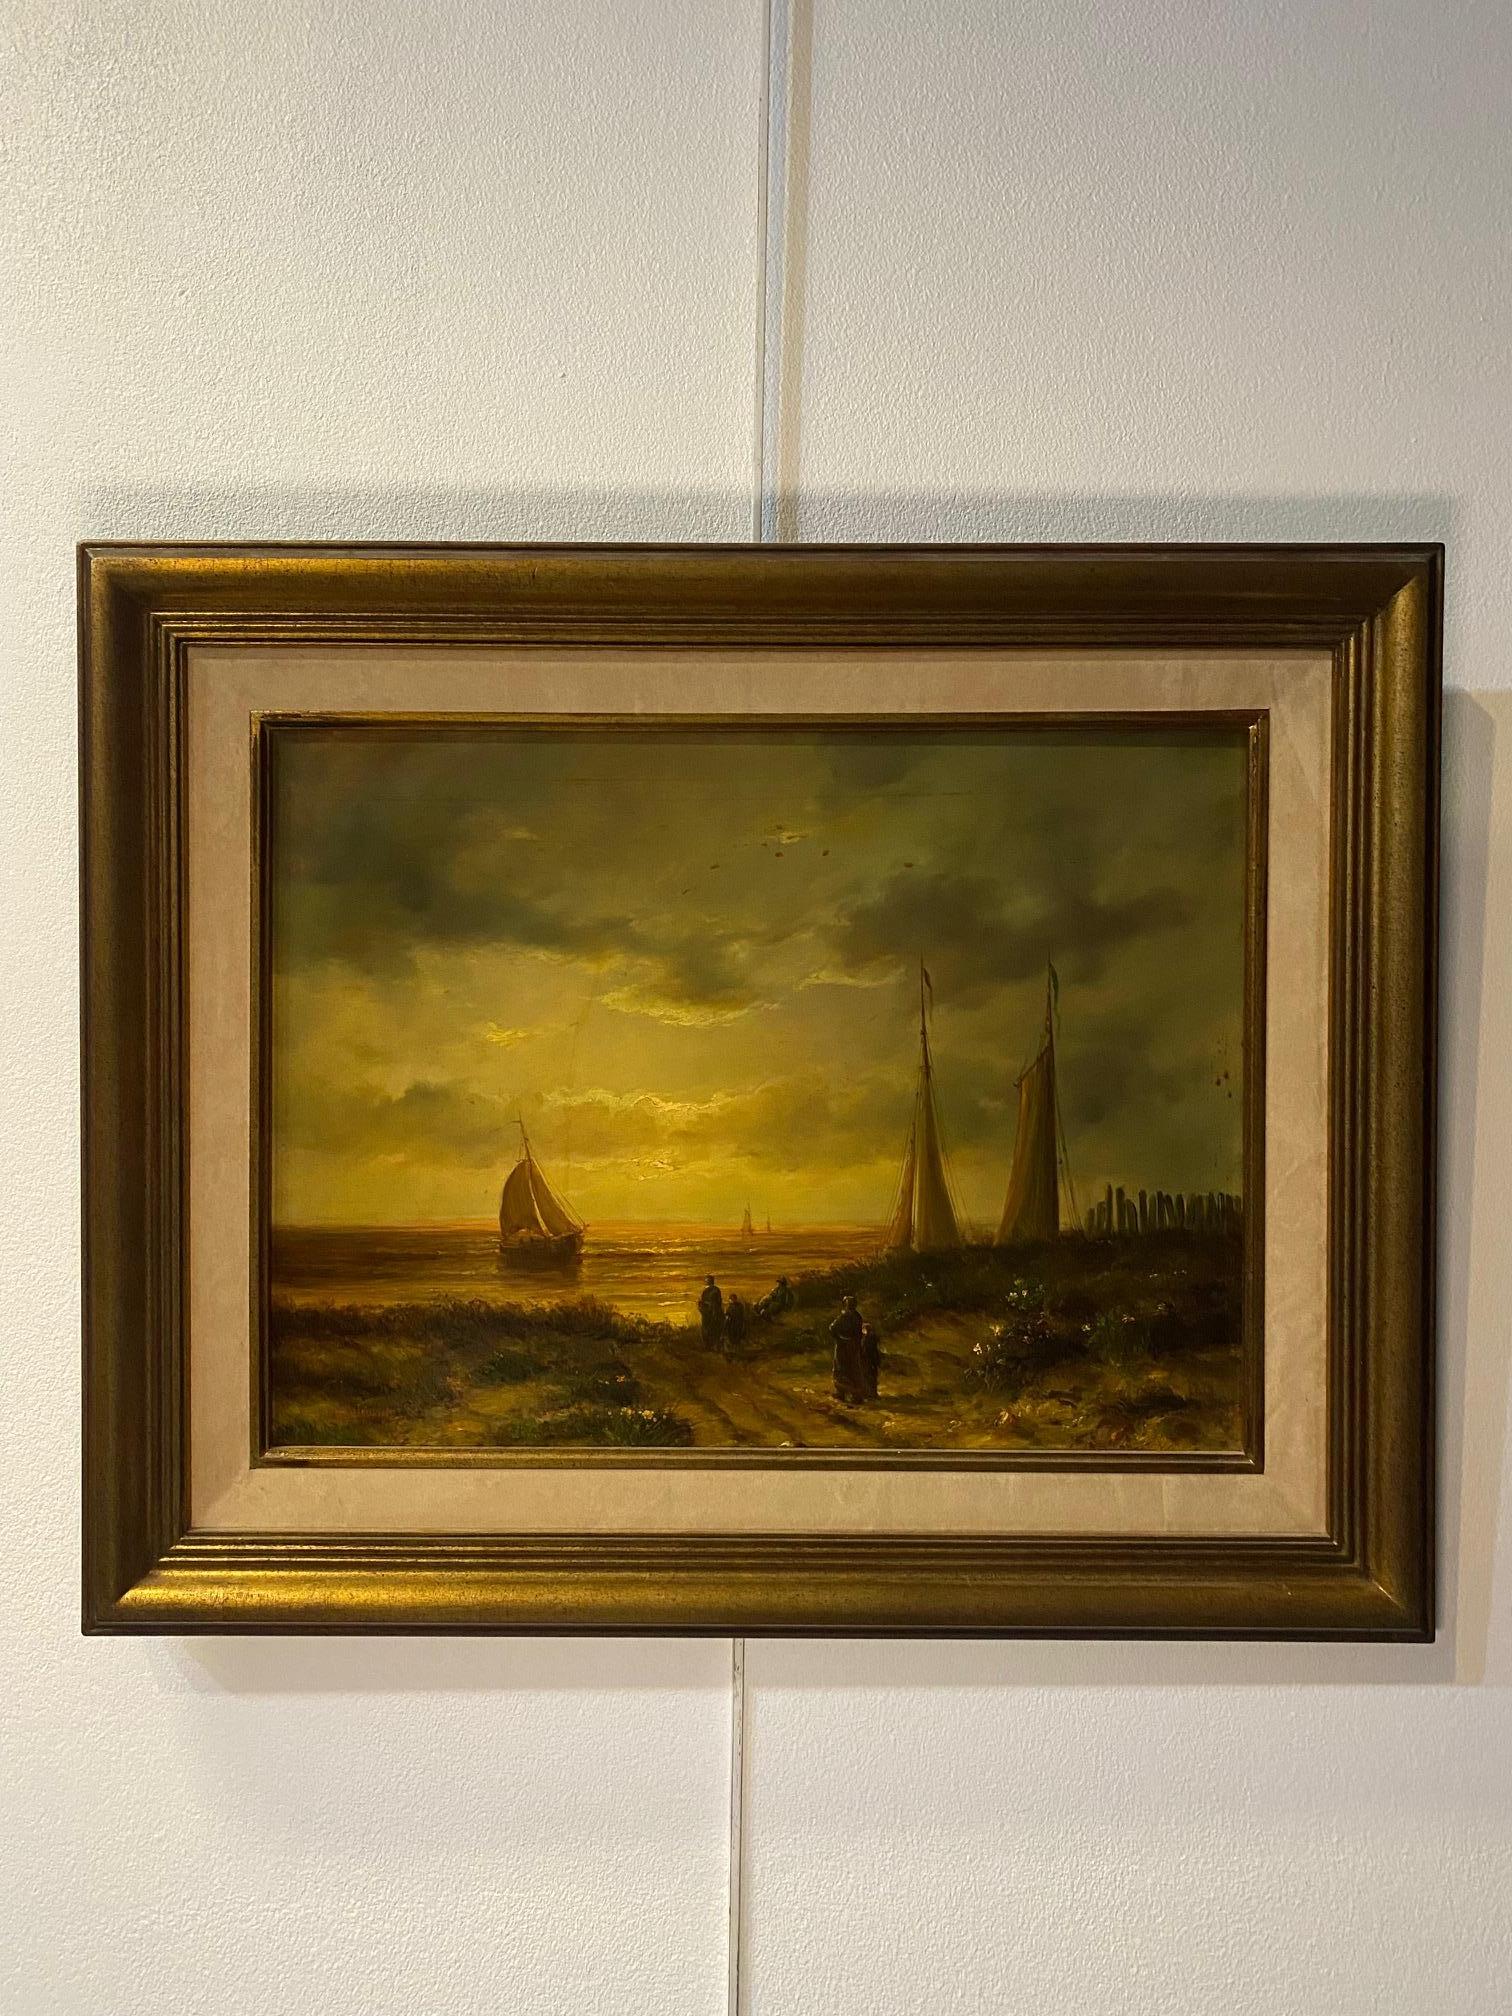 Sailboat departure by Jean Laurent - Oil on wood 29x38 cm For Sale 2